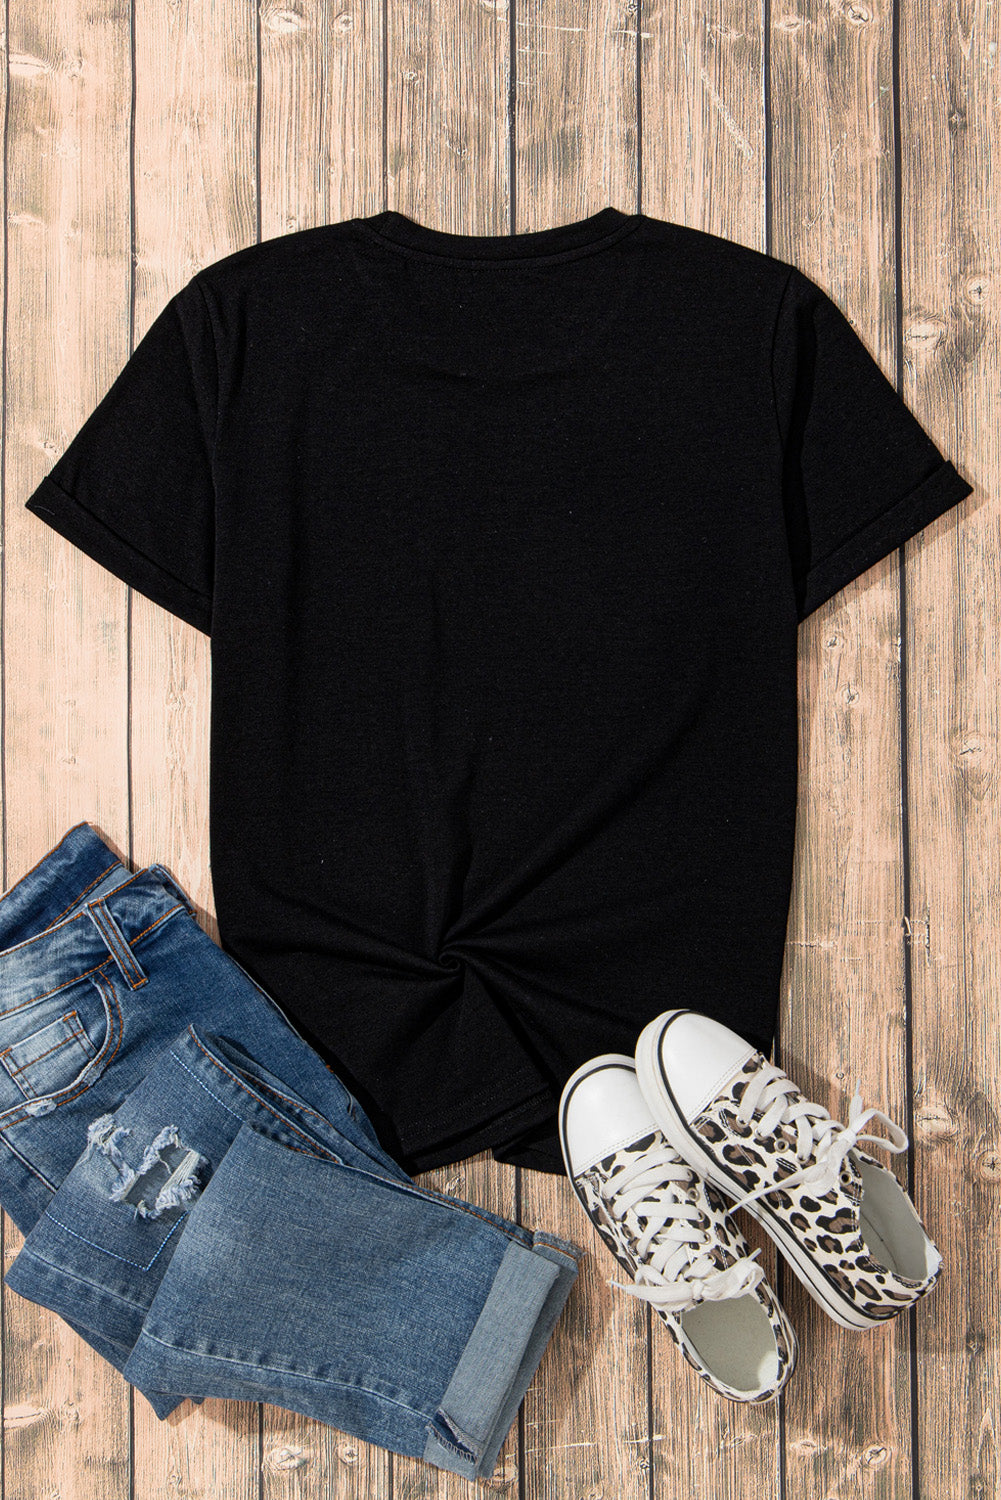 Stand Out with the Graphic Round Neck Short Sleeve T-Shirt